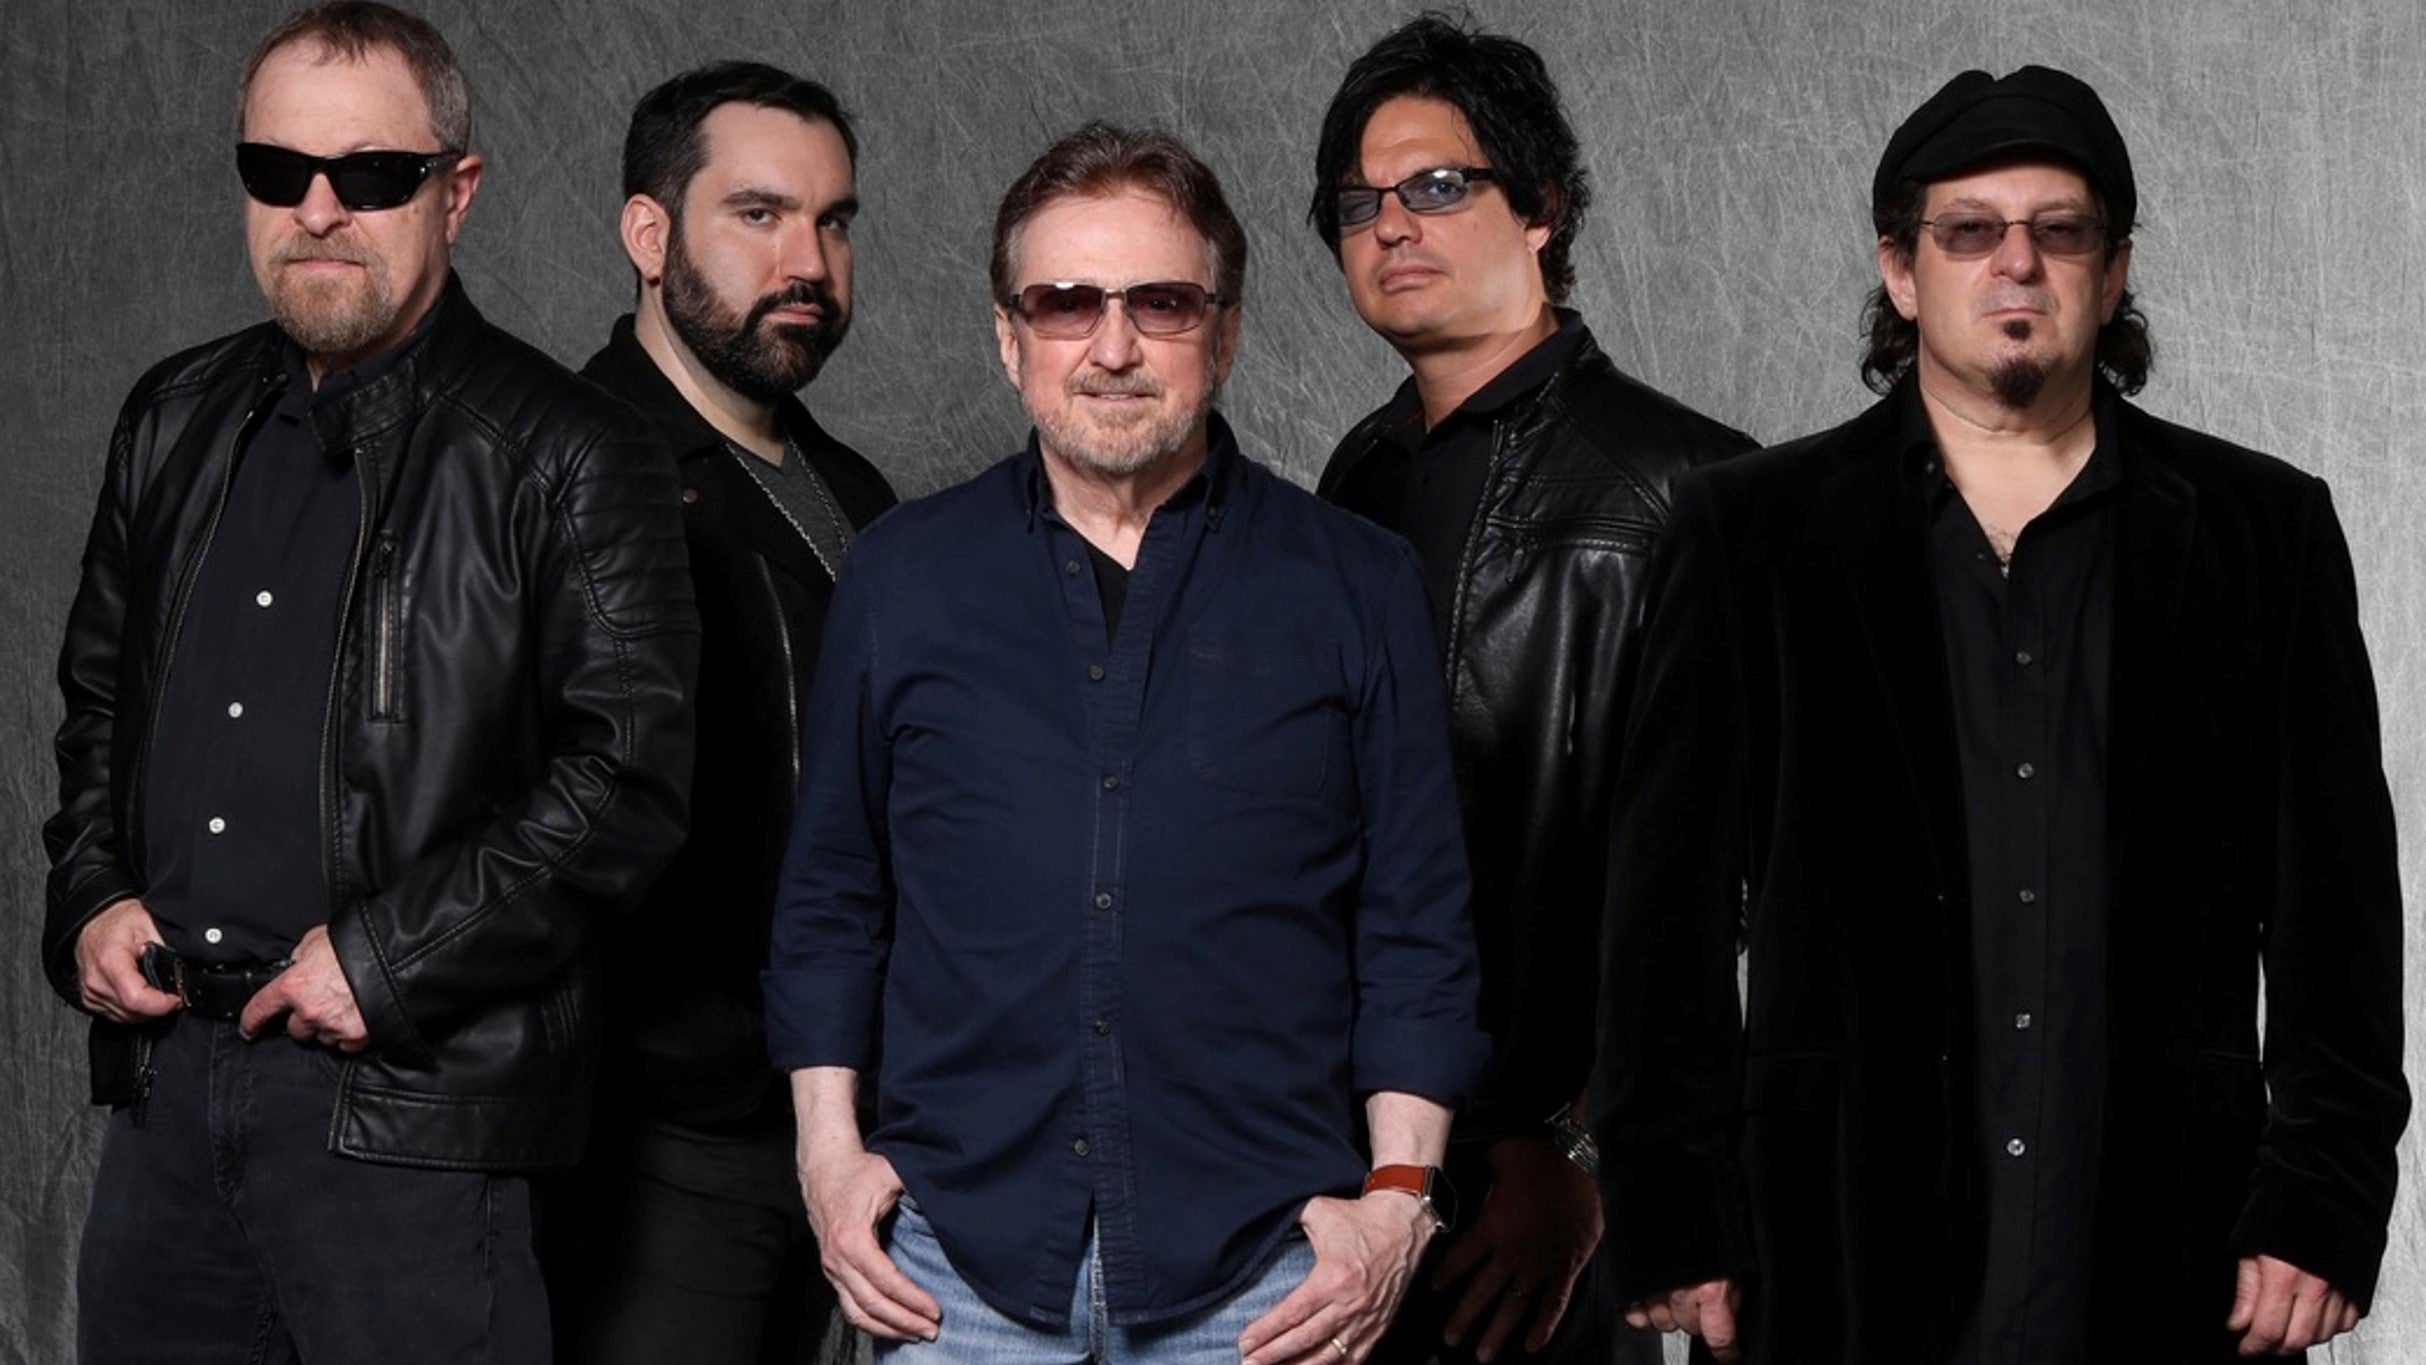 Blue Oyster Cult presale password for advance tickets in Atlantic City